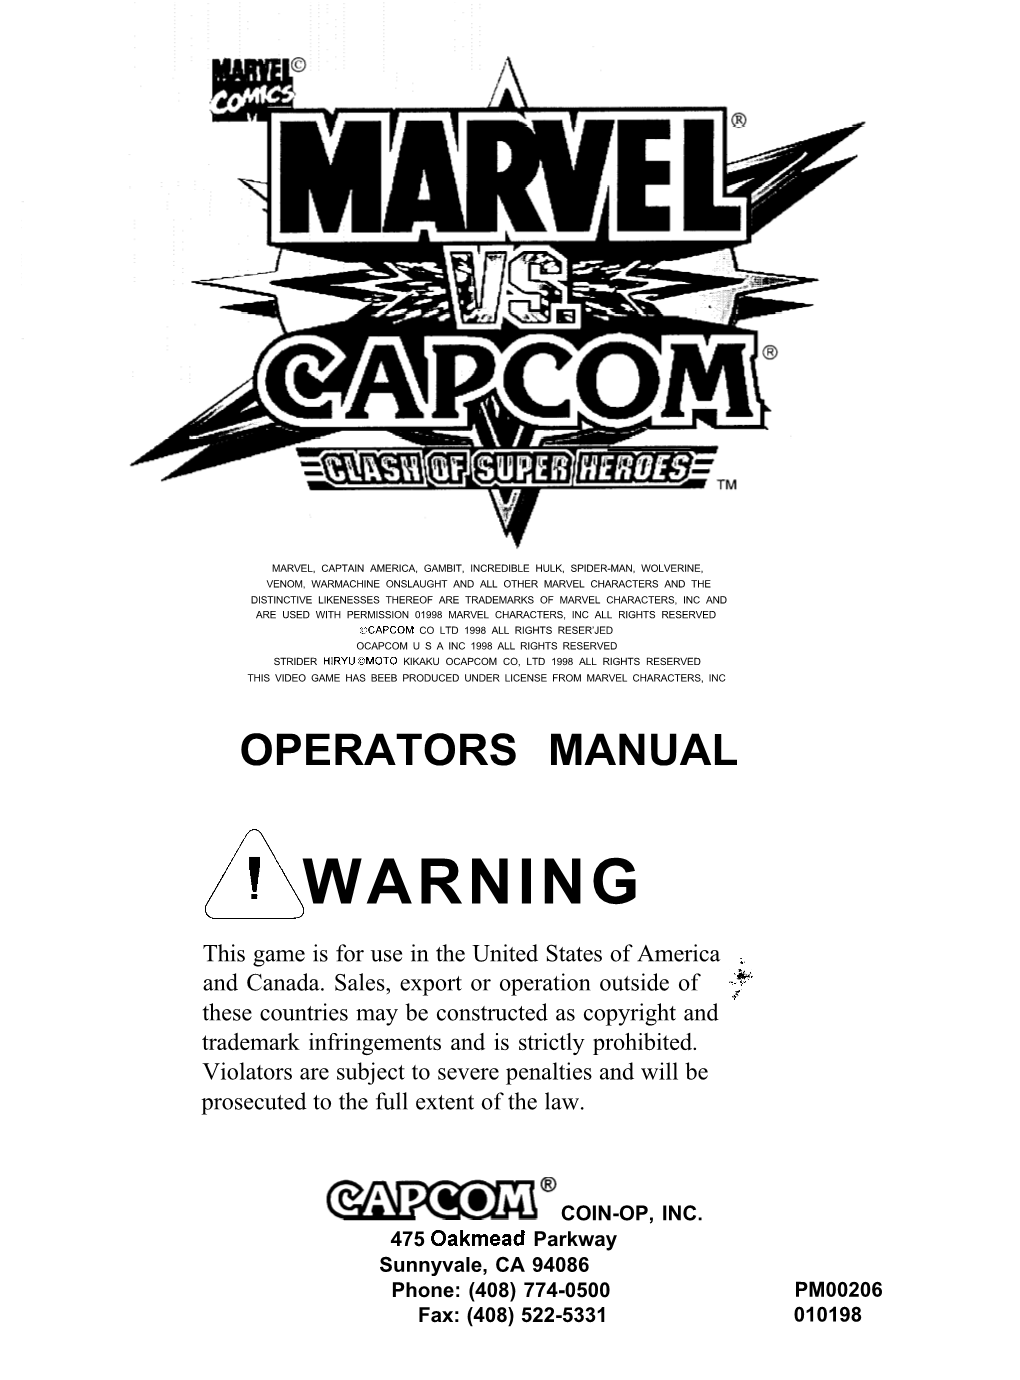 A! WARNING This Game Is for Use in the United States of America ;, and Canada